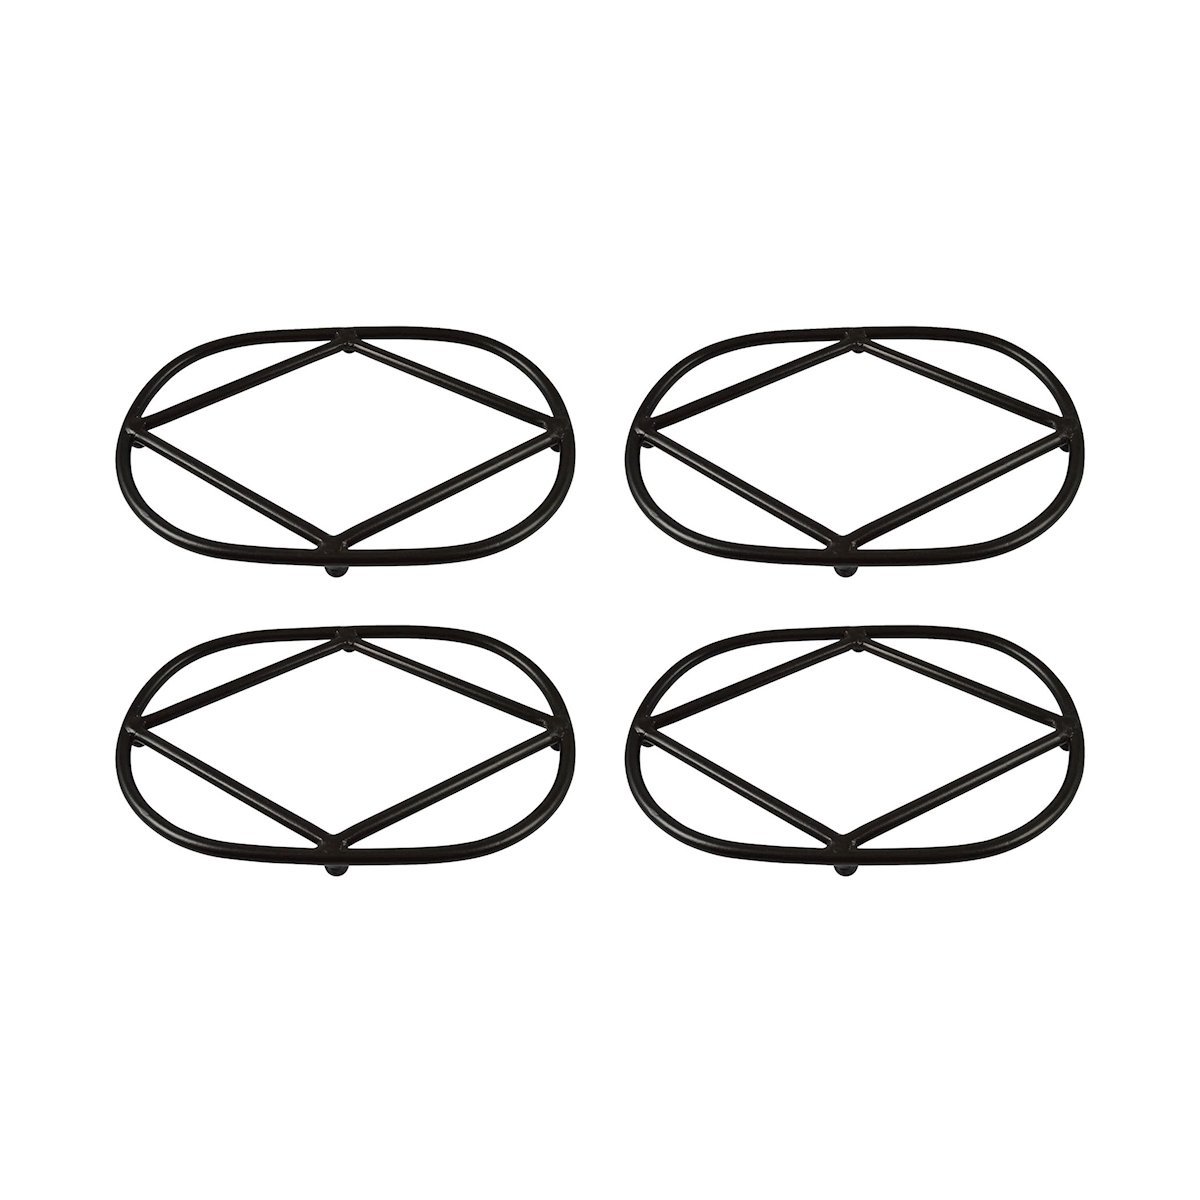 Lex Set of 4 Oval Trivets Accessories Pomeroy 